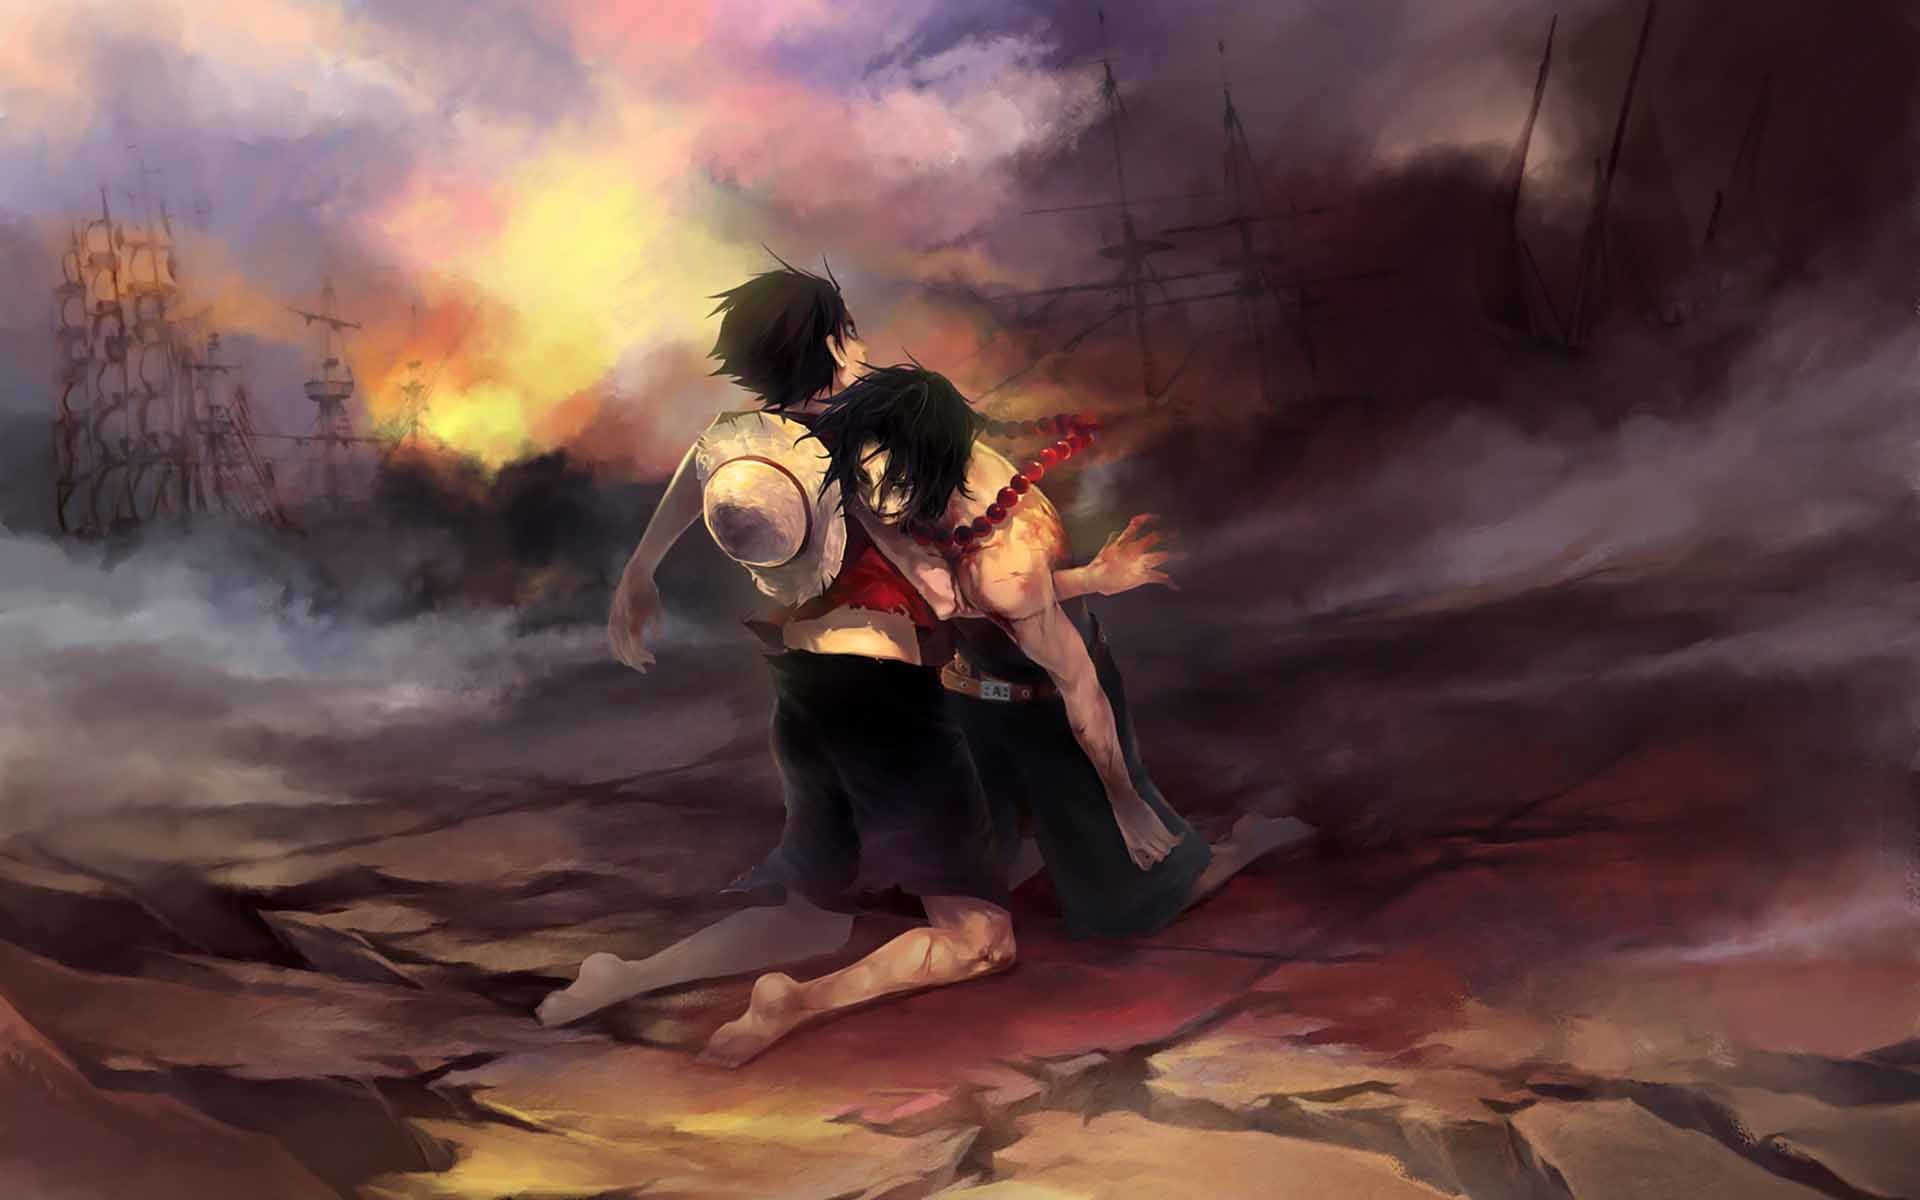 One Piece Luffy Ace Anime Wallpaper Dreamlovewallpapers 1920x1200